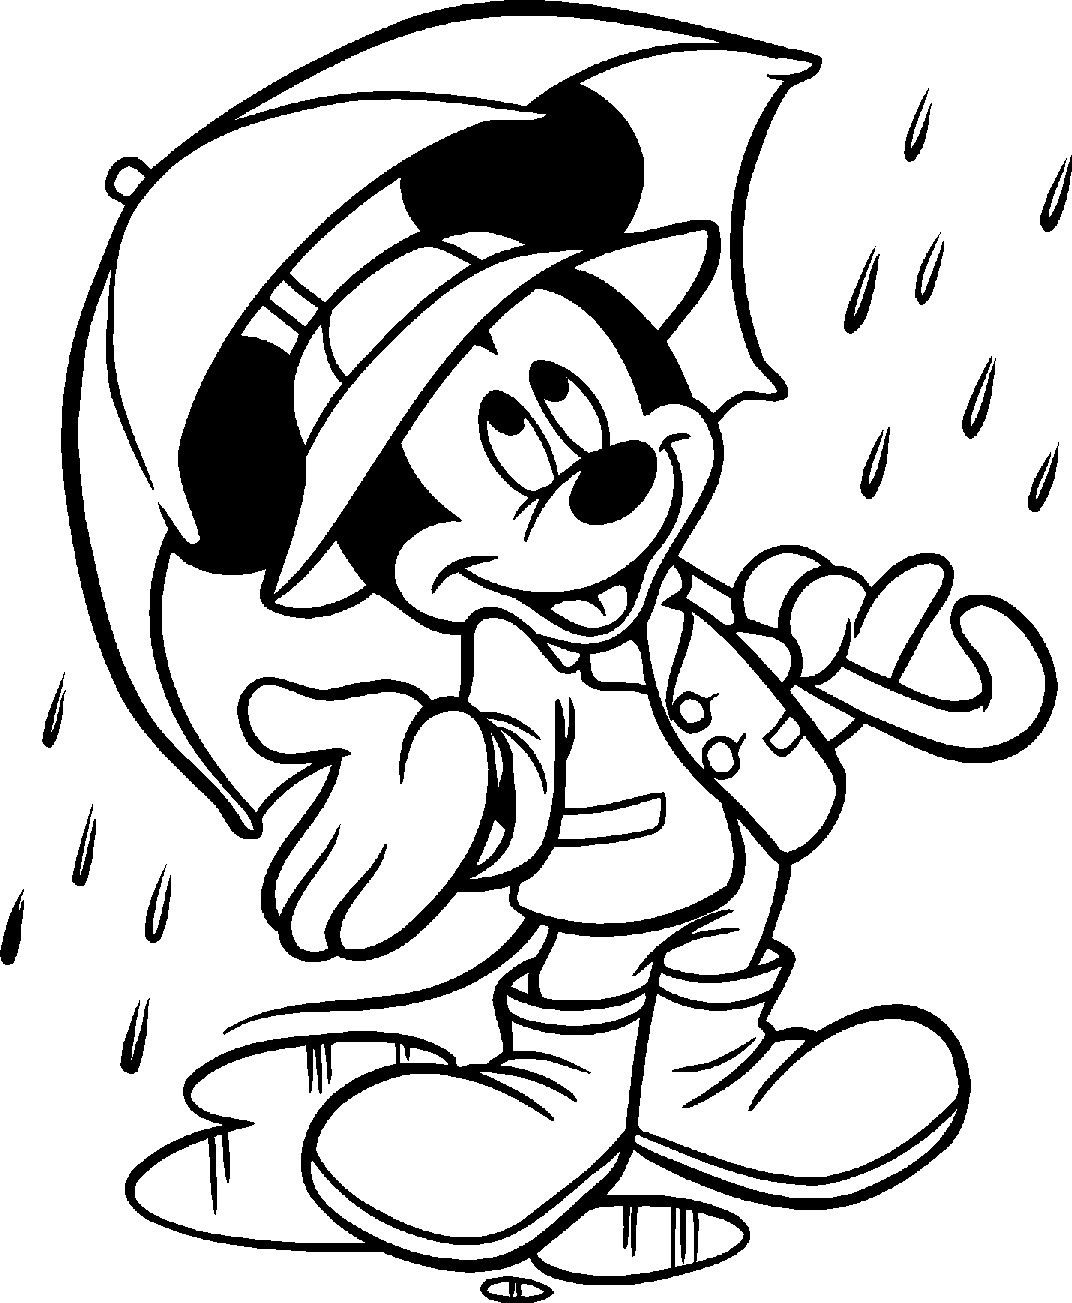 Cute Cartoon Characters Coloring Pages at Free